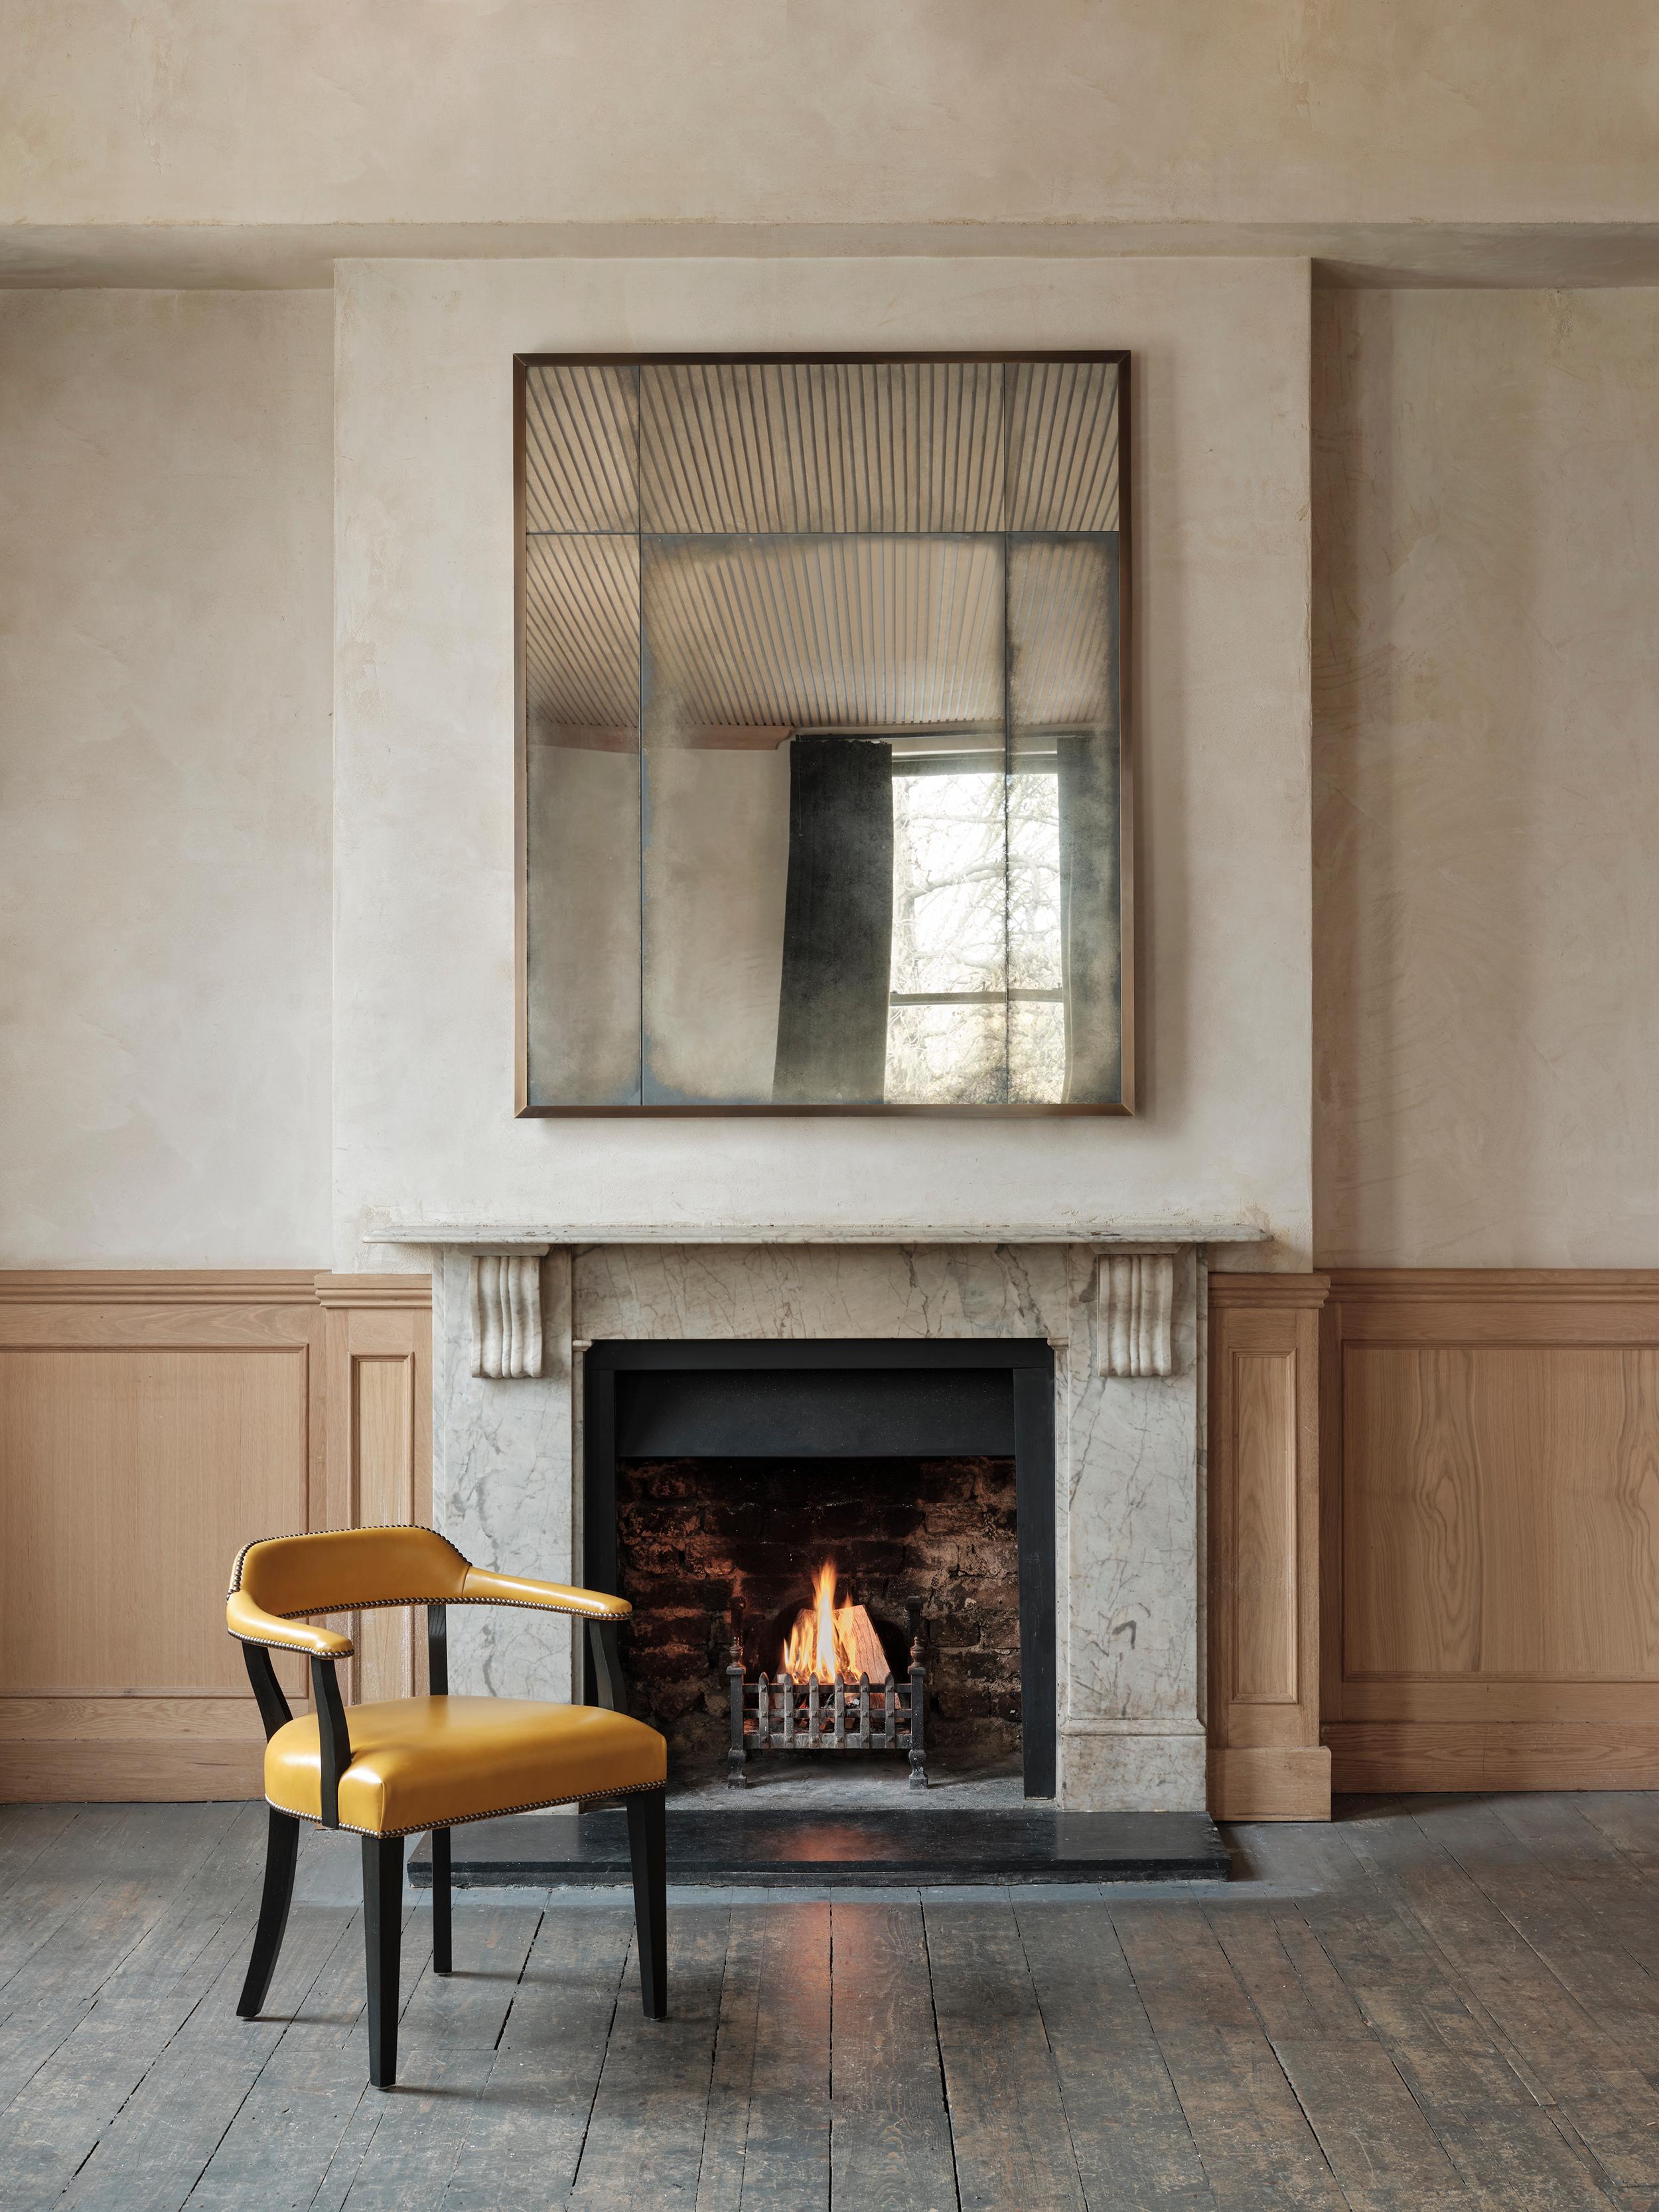 A signature piece for Rupert Bevan, our elegant Art Deco overmantel mirror features a patinated brass angle frame with lightly antiqued mirror glass panels.

Handcrafted in our Shropshire workshops, each mirror is made with hidden split batten wall